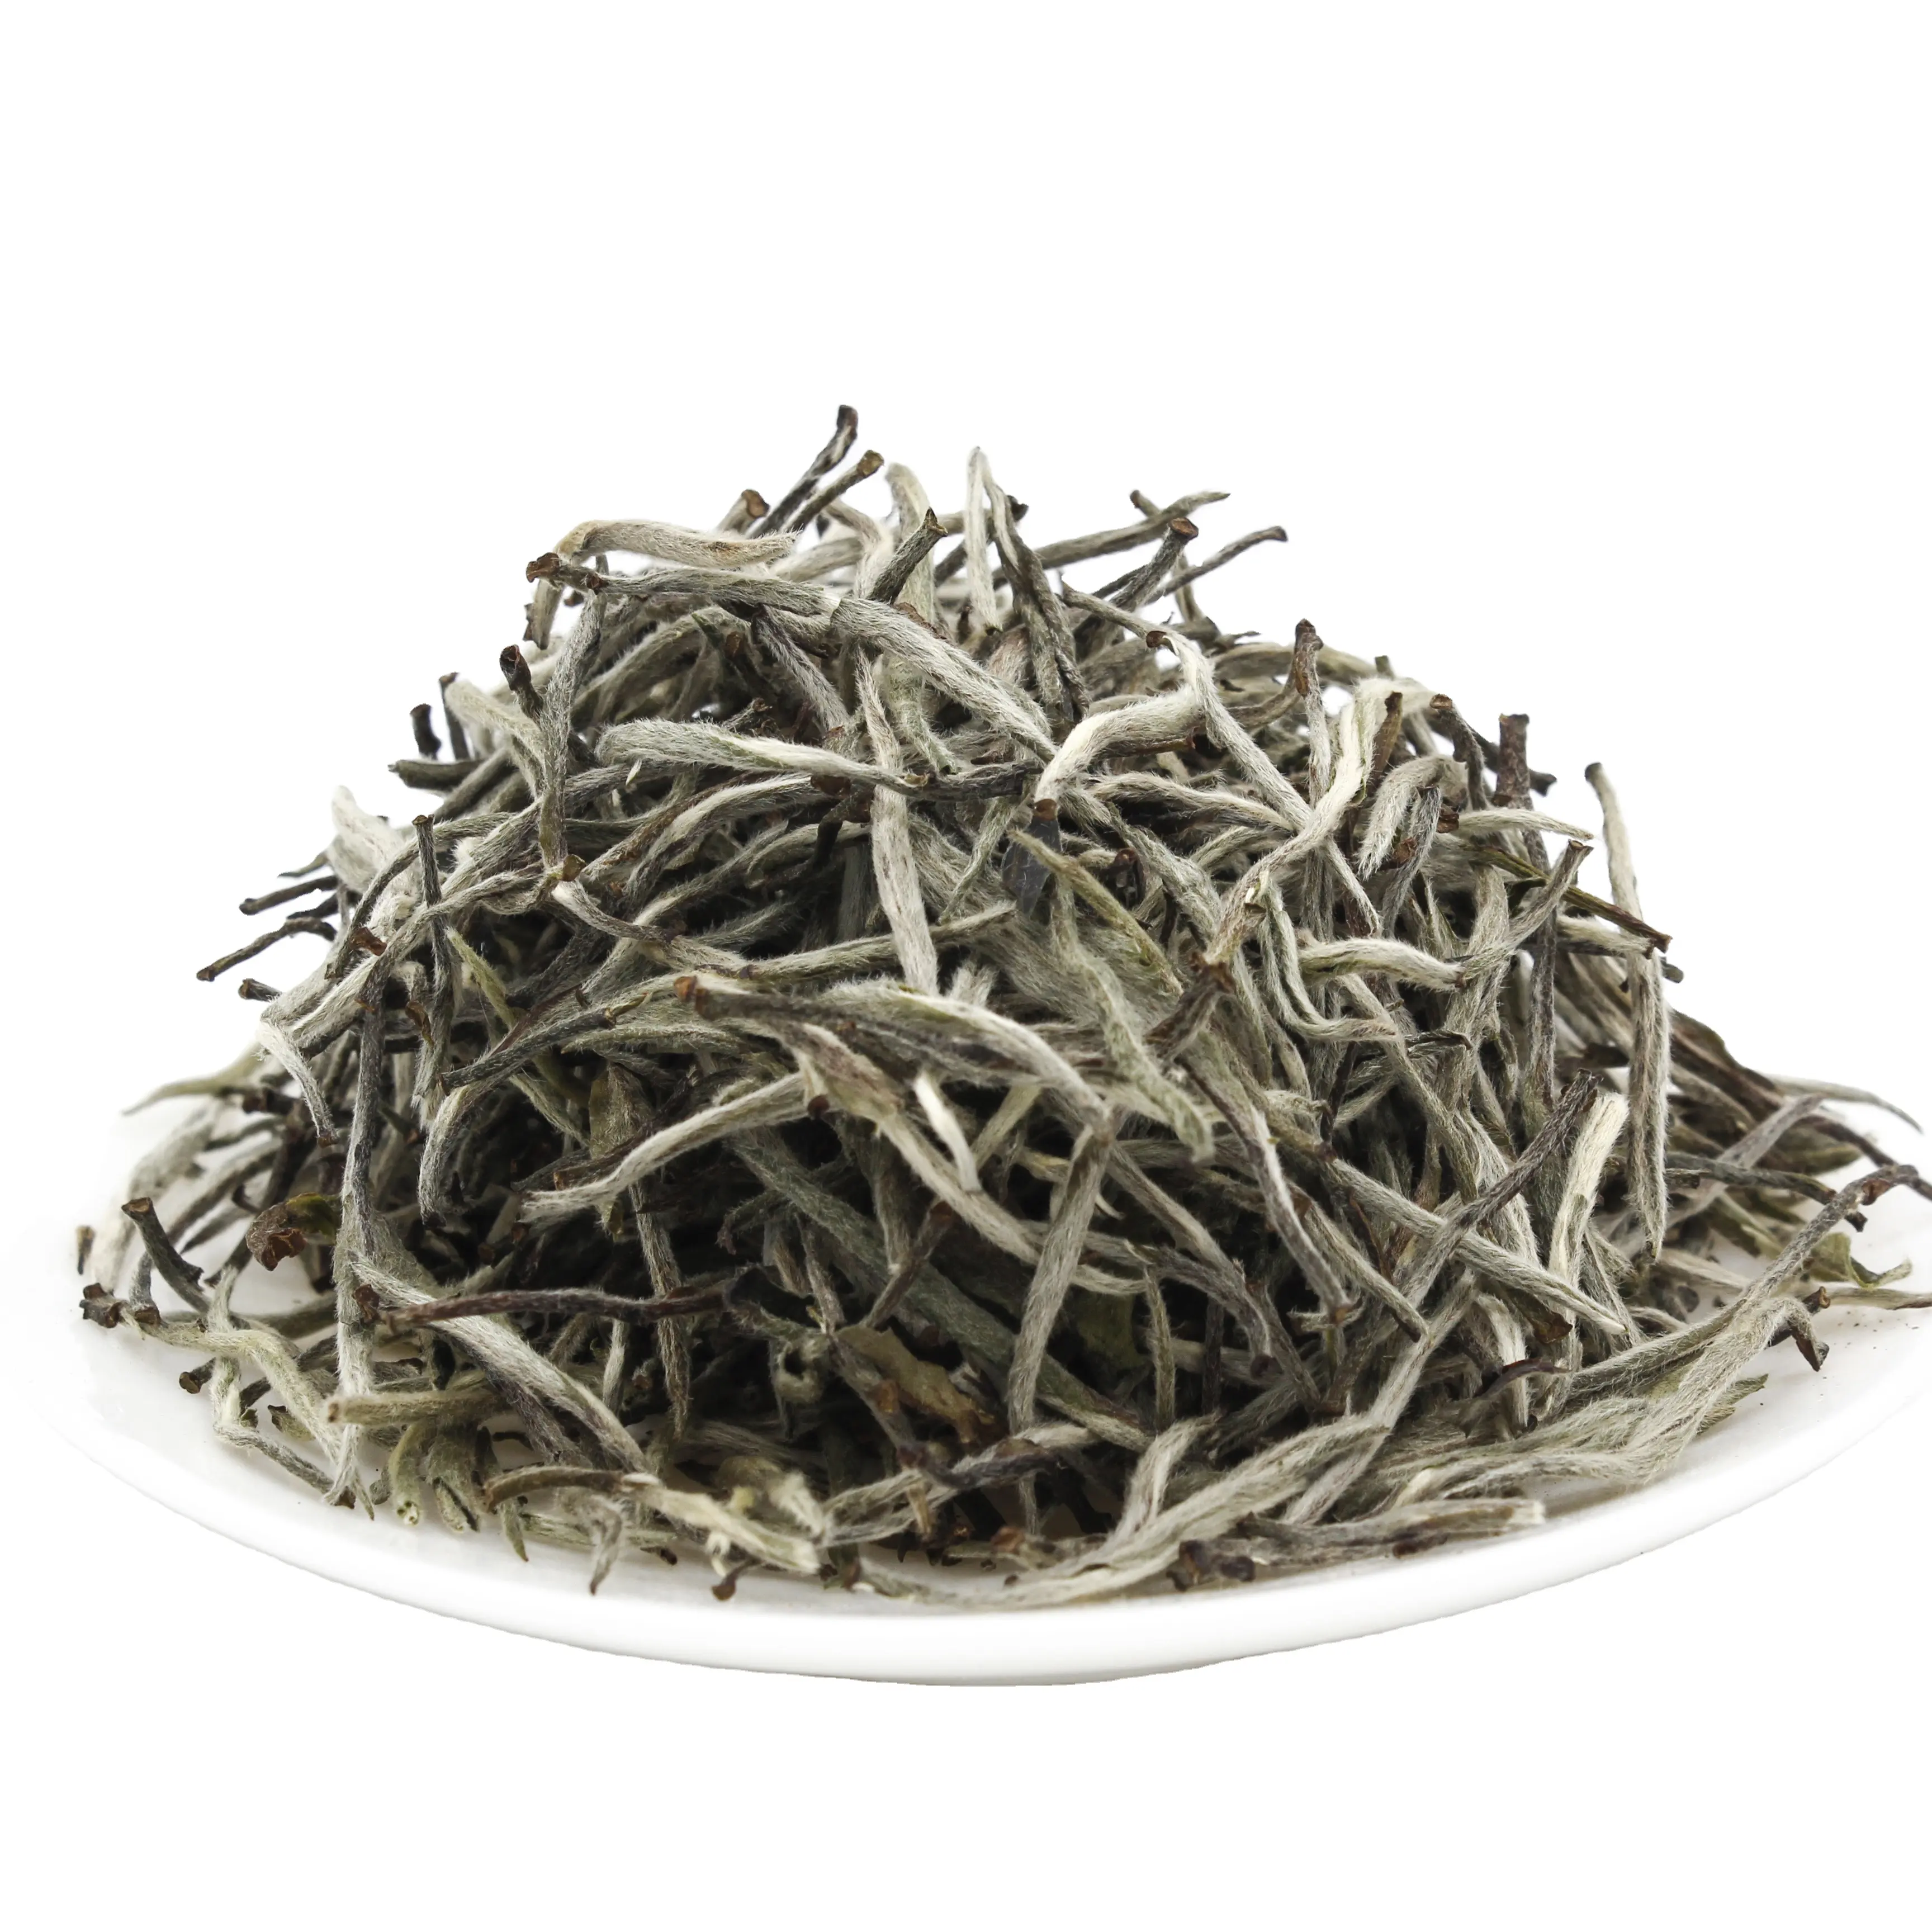 SLW01-1 Tea Manufacturers Pure Leaf Tea Weight Loose Chinese Natural Organic Food Baihao Yingzhen